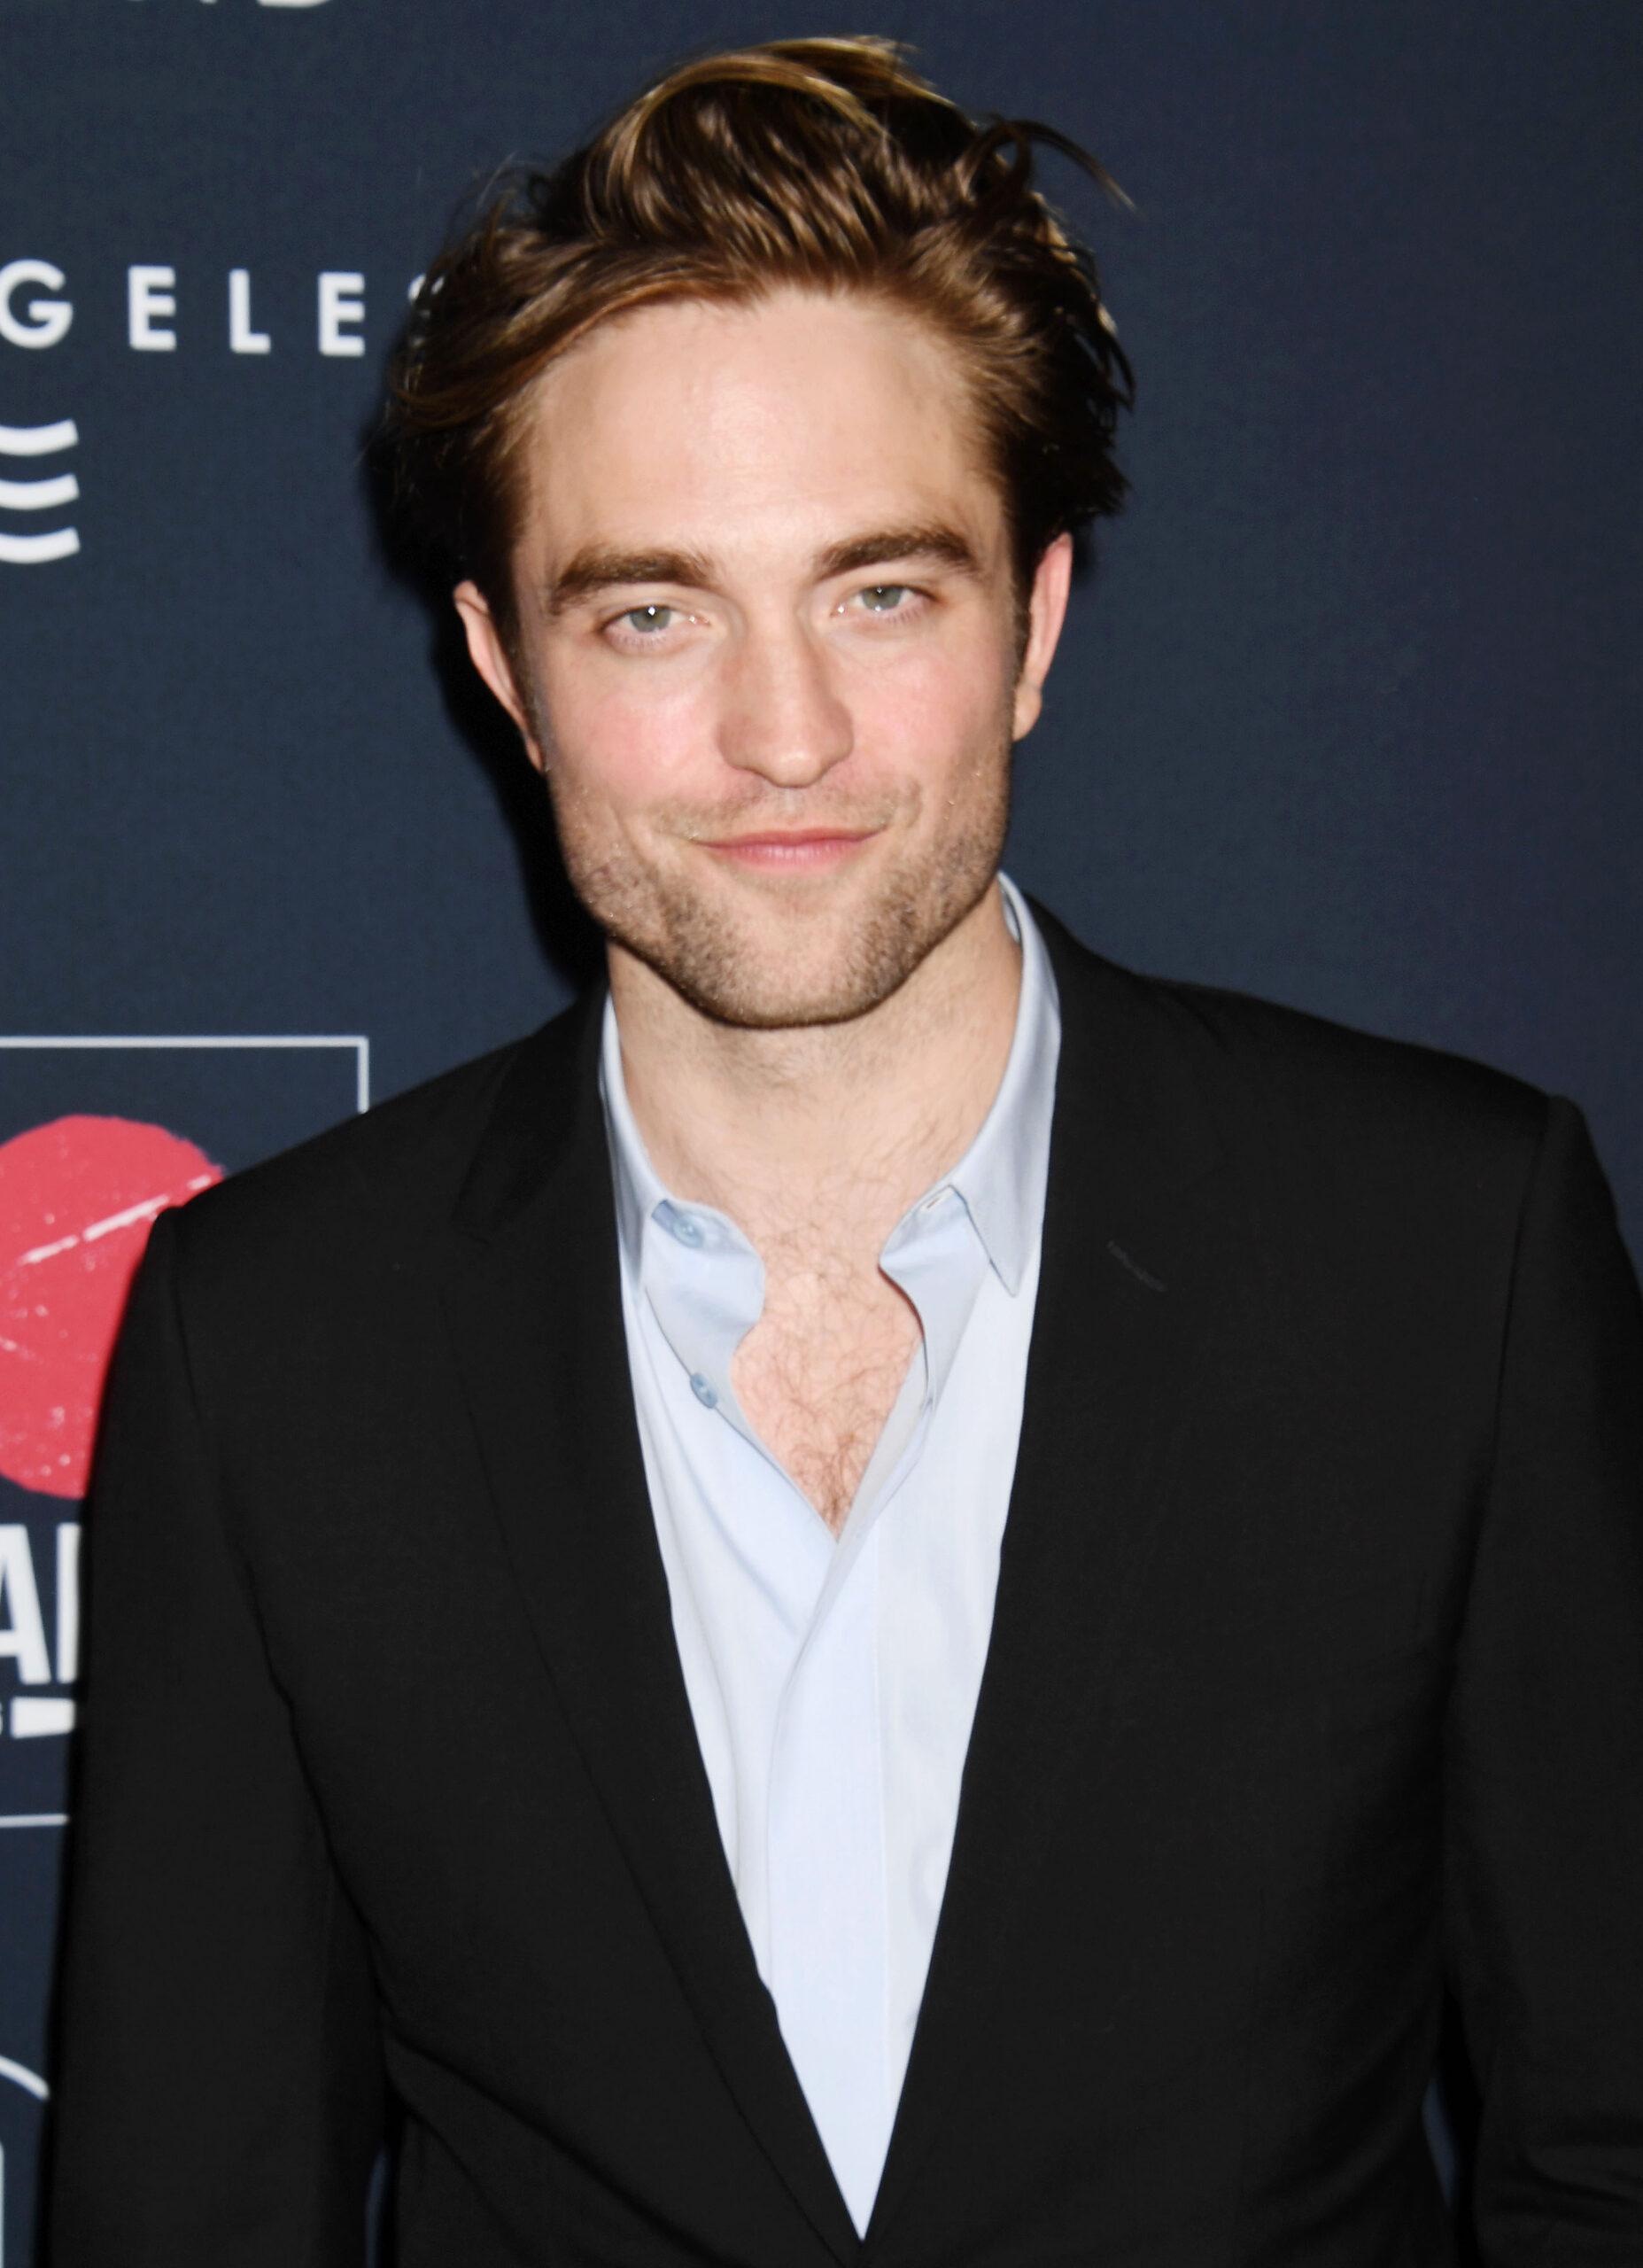 A photo showing Robert Pattinson in a black suit and white inner T-shirt.